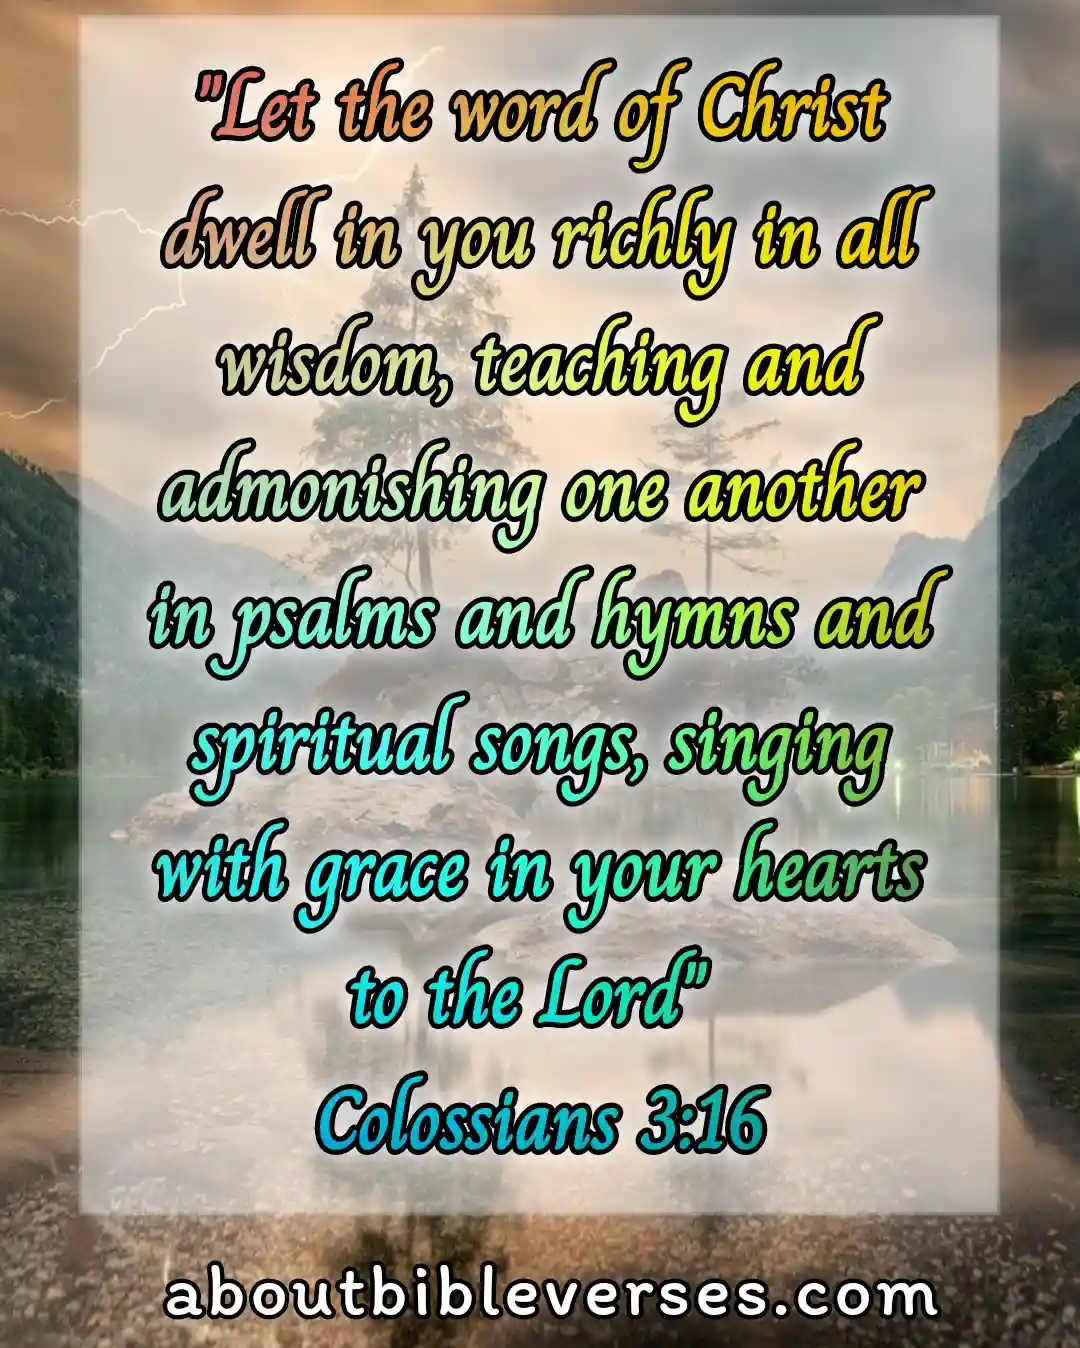 Bible Verses About Fellowship With Other Believers (Colossians 3:16)